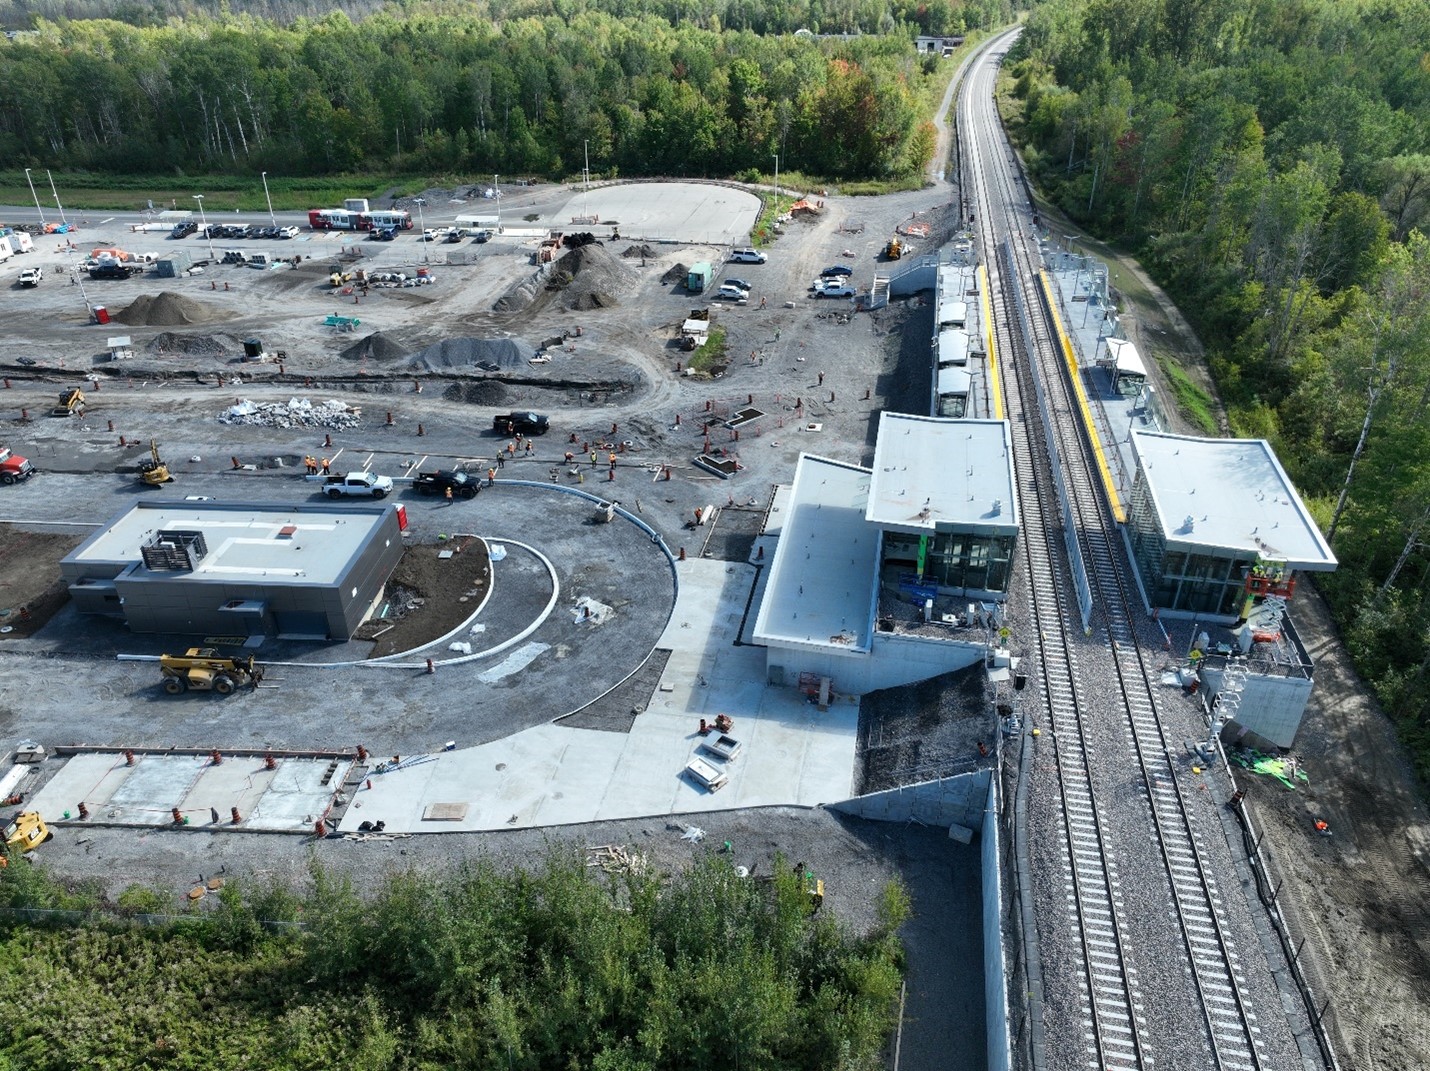 Construction continues on Leitrim Station and the Park & Ride lot.